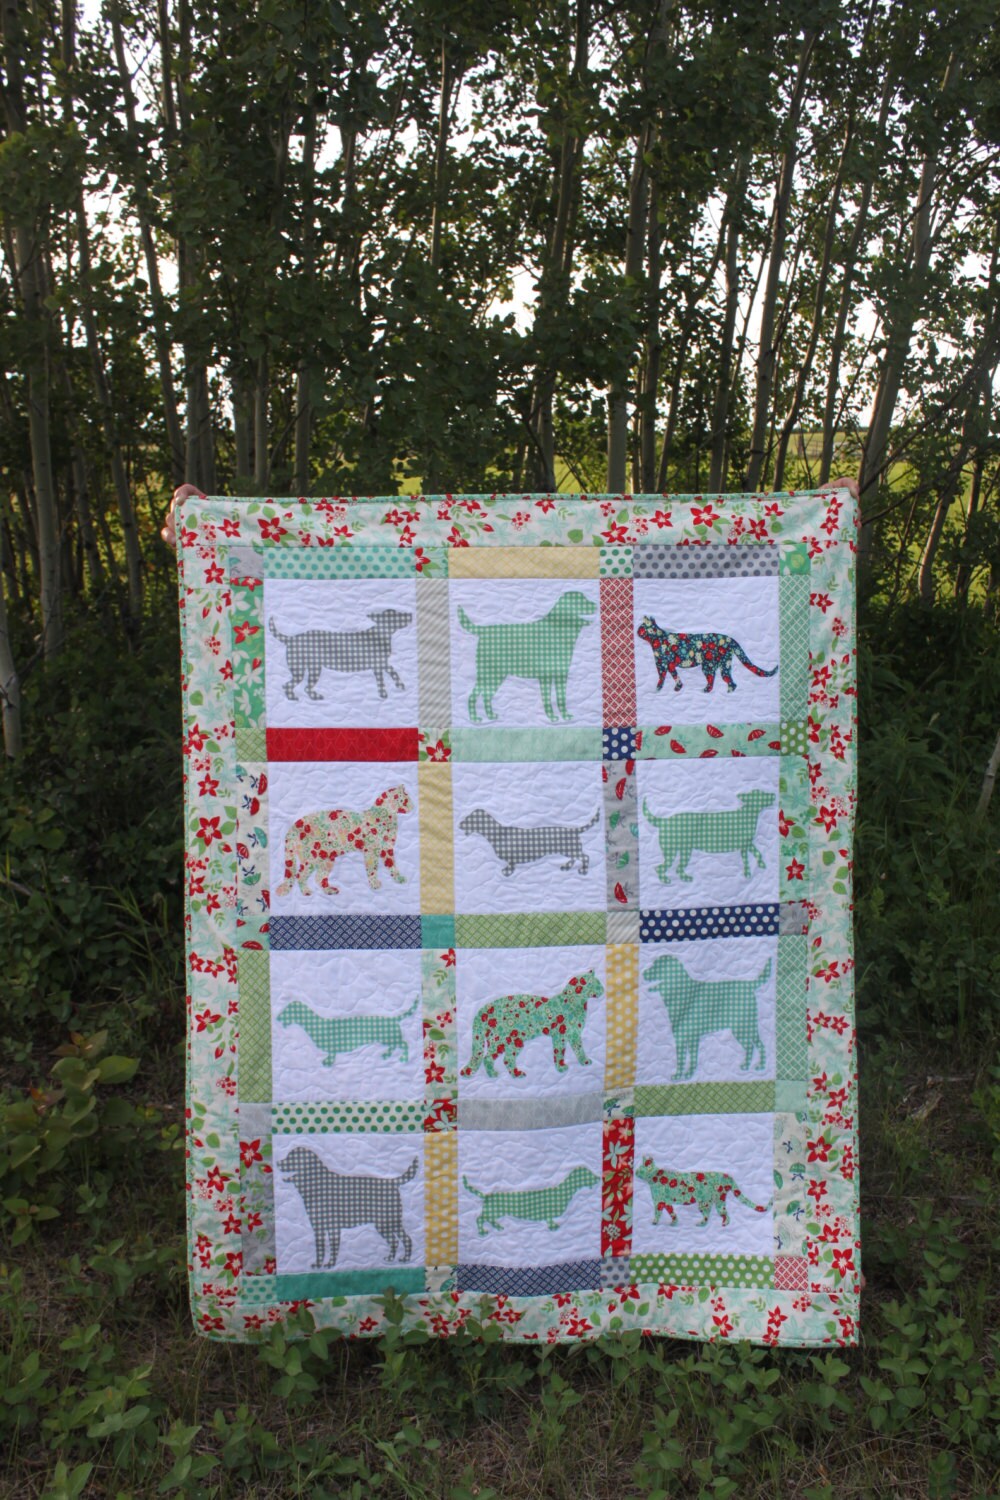 Gingham Dog and Calico Cat PDF Quilt Pattern Dog and Cat silhouette applique Crib or Toddler Bed Quilt